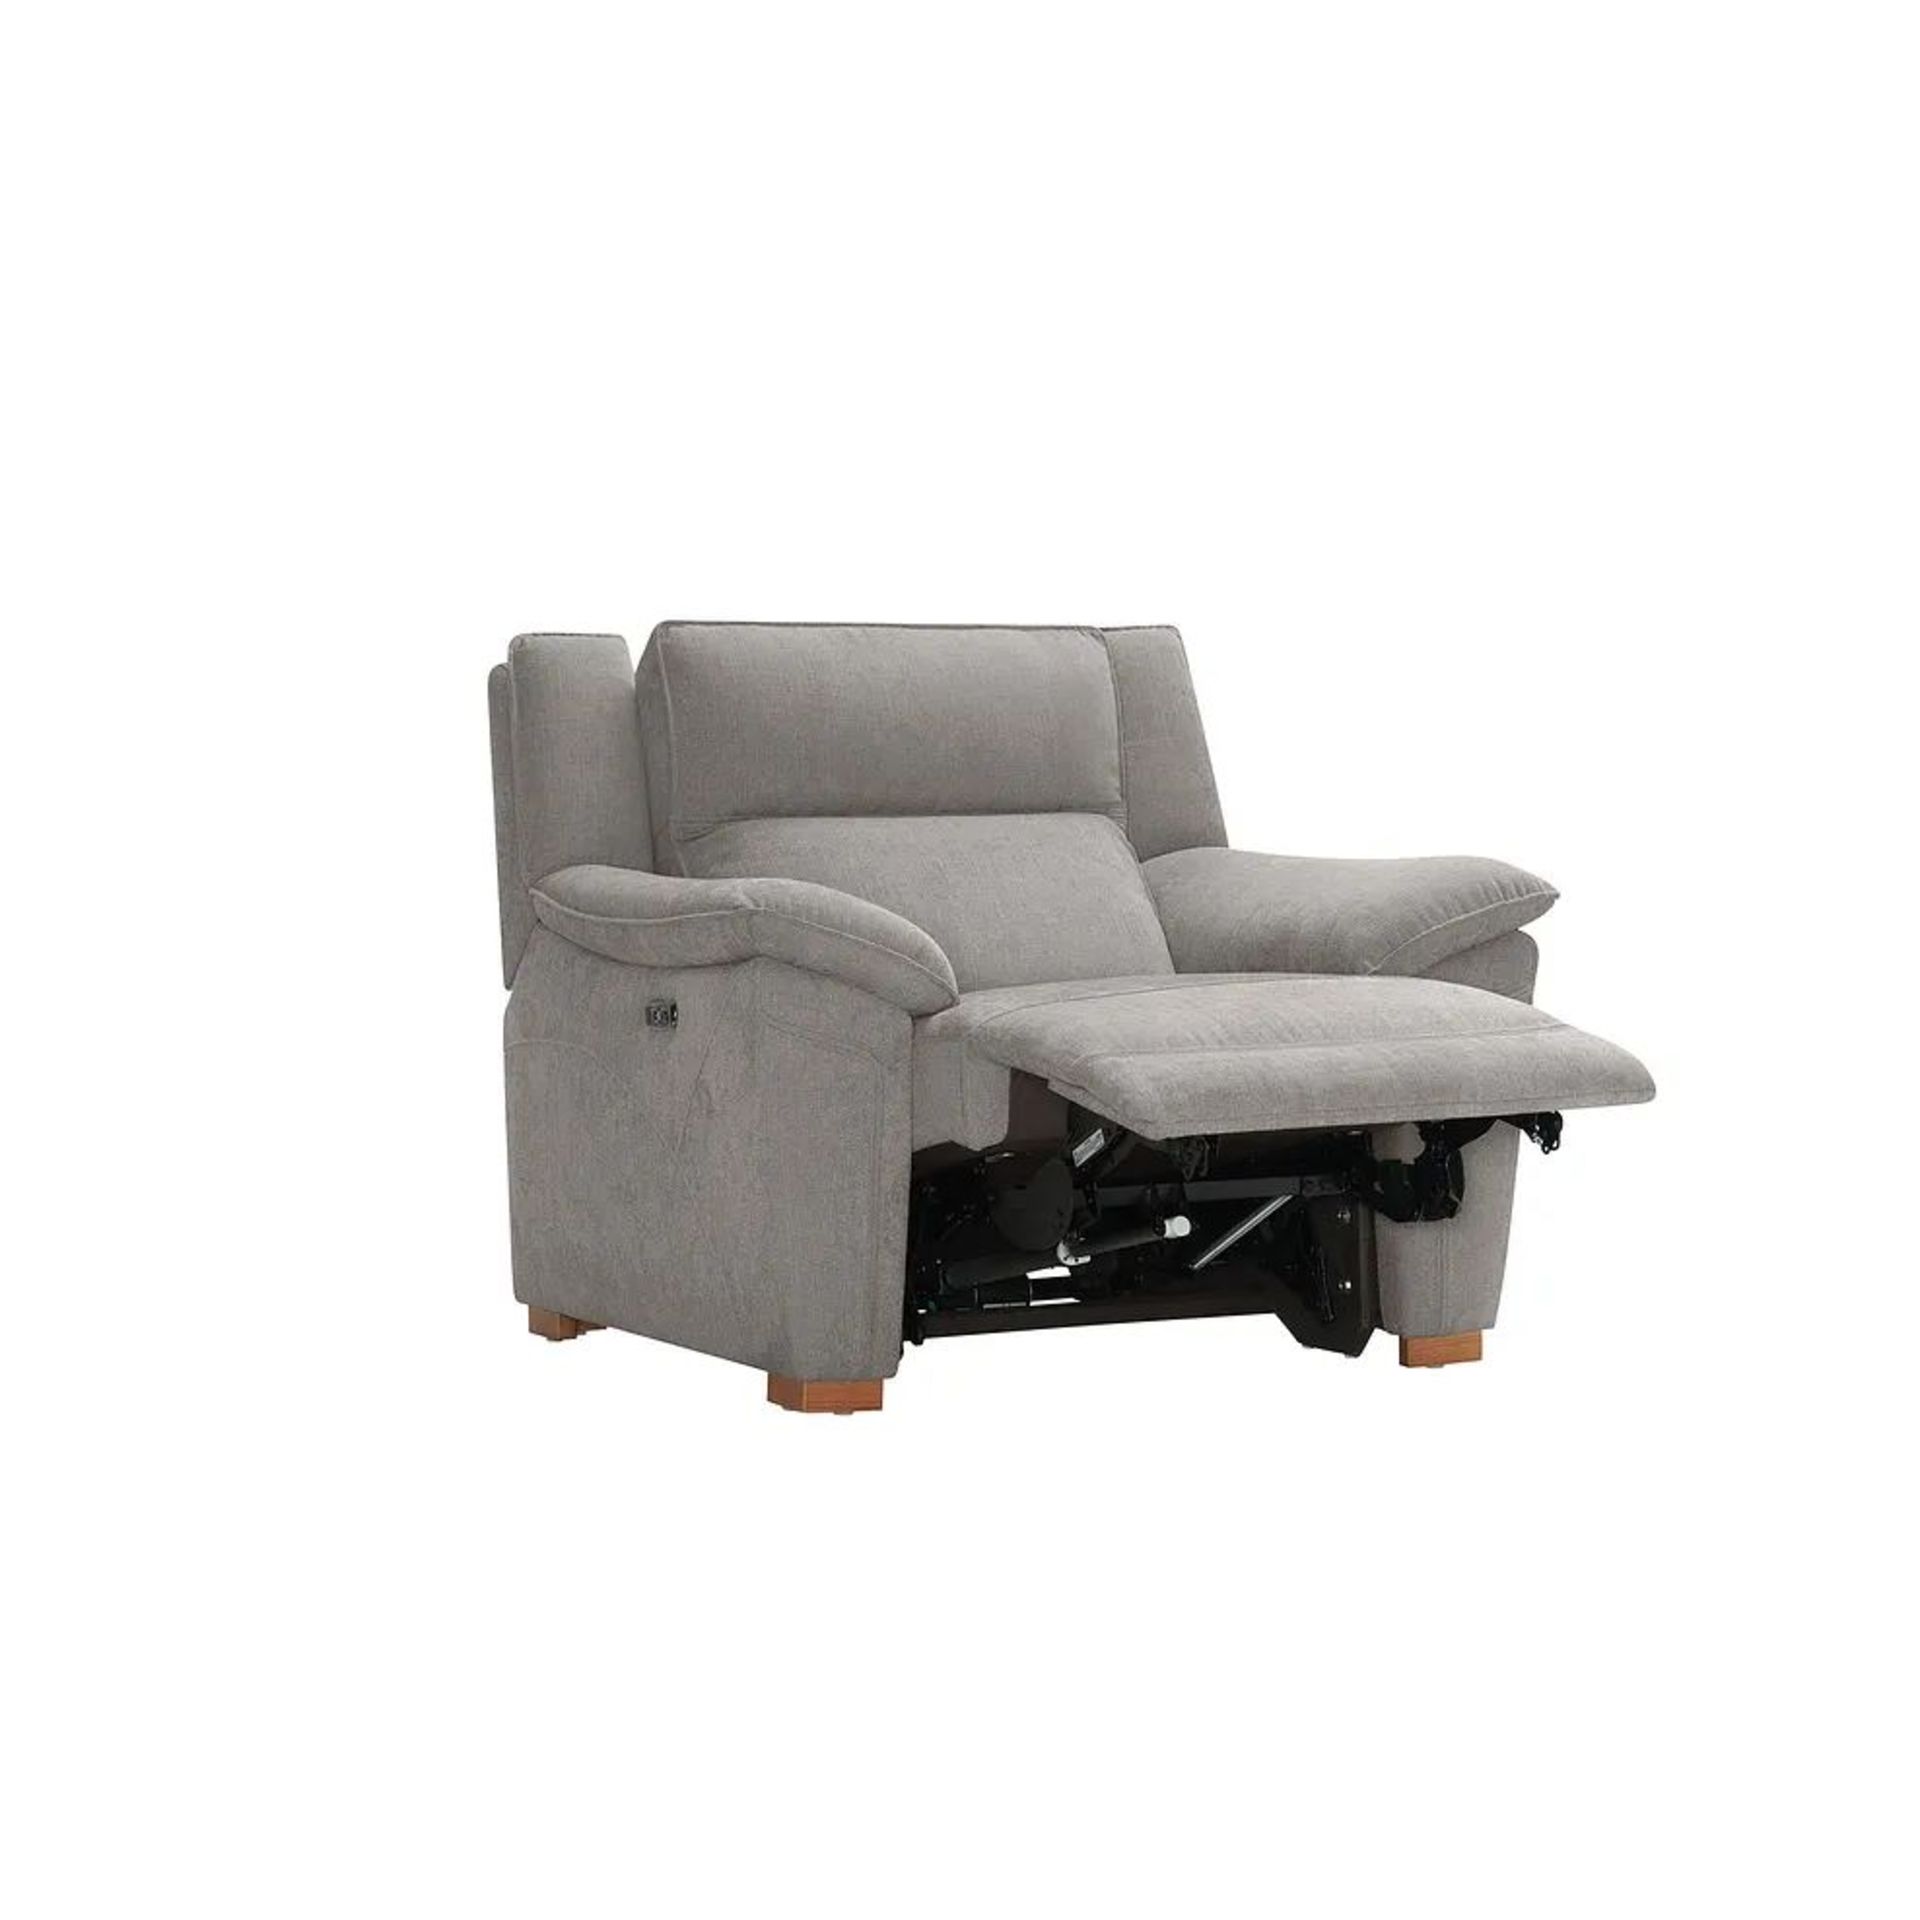 BRAND NEW DUNE Electric Recliner Armchair with Power Headrest - AMIGO GRANITE FABRIC. RRP £1099. - Image 6 of 12